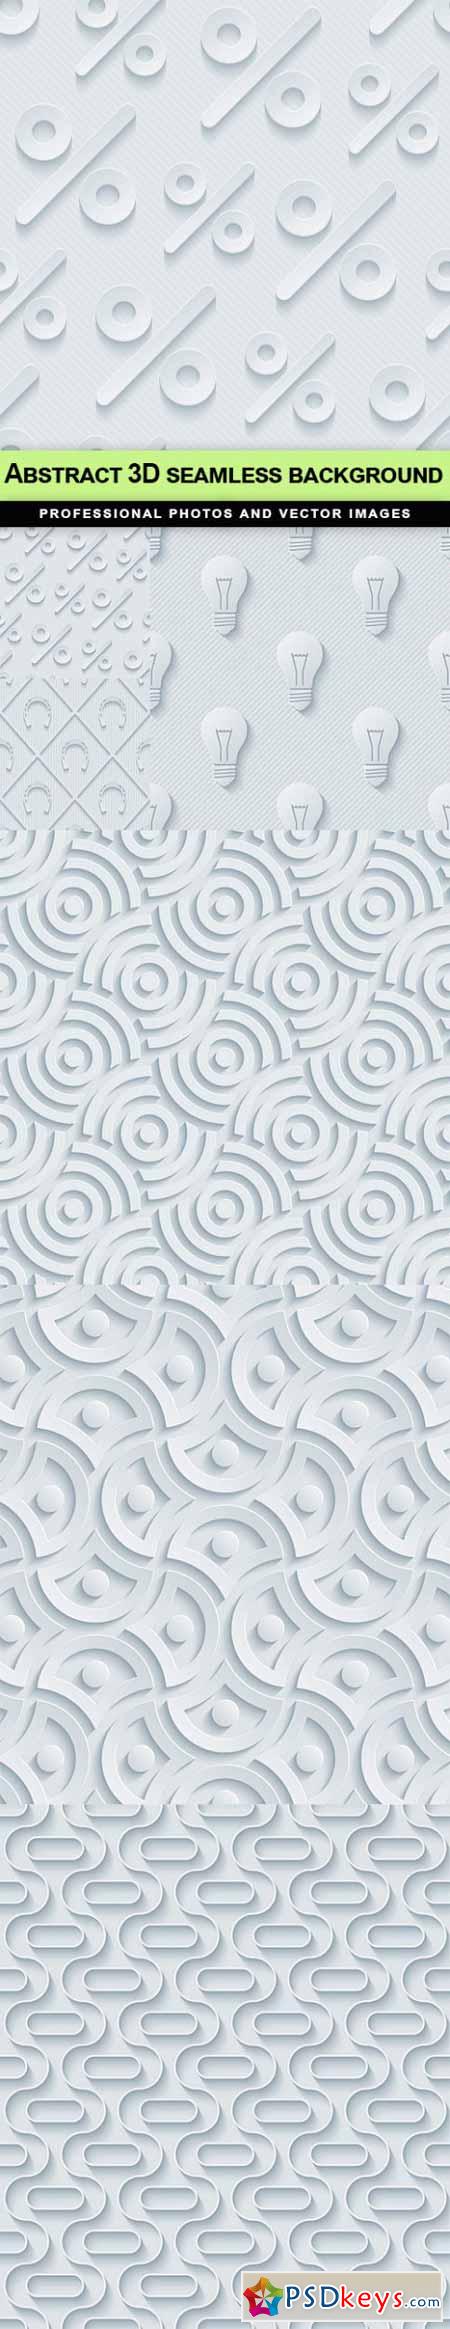 Abstract 3D seamless background - 6 EPS